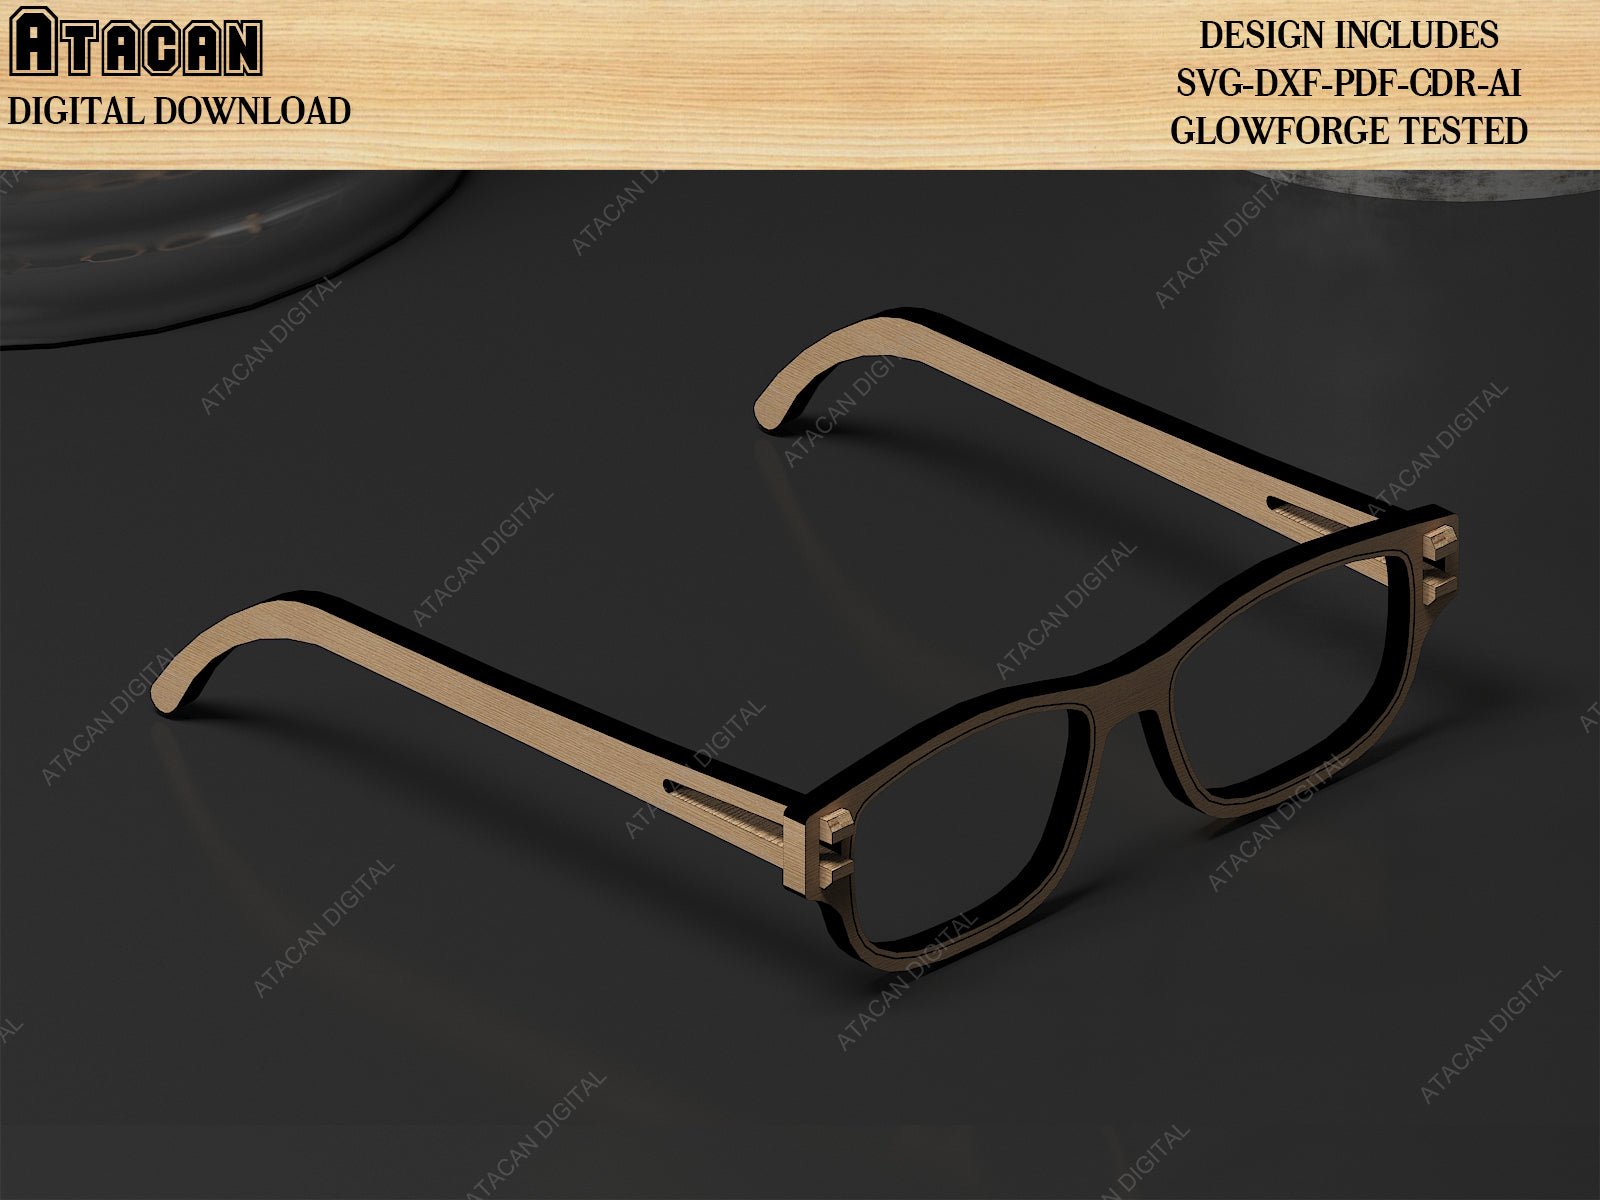 Laser Cut Items / Wood Handle Stamp / Pencil Box / Wooden Sunglasses SVG DXF CDR Ai 495